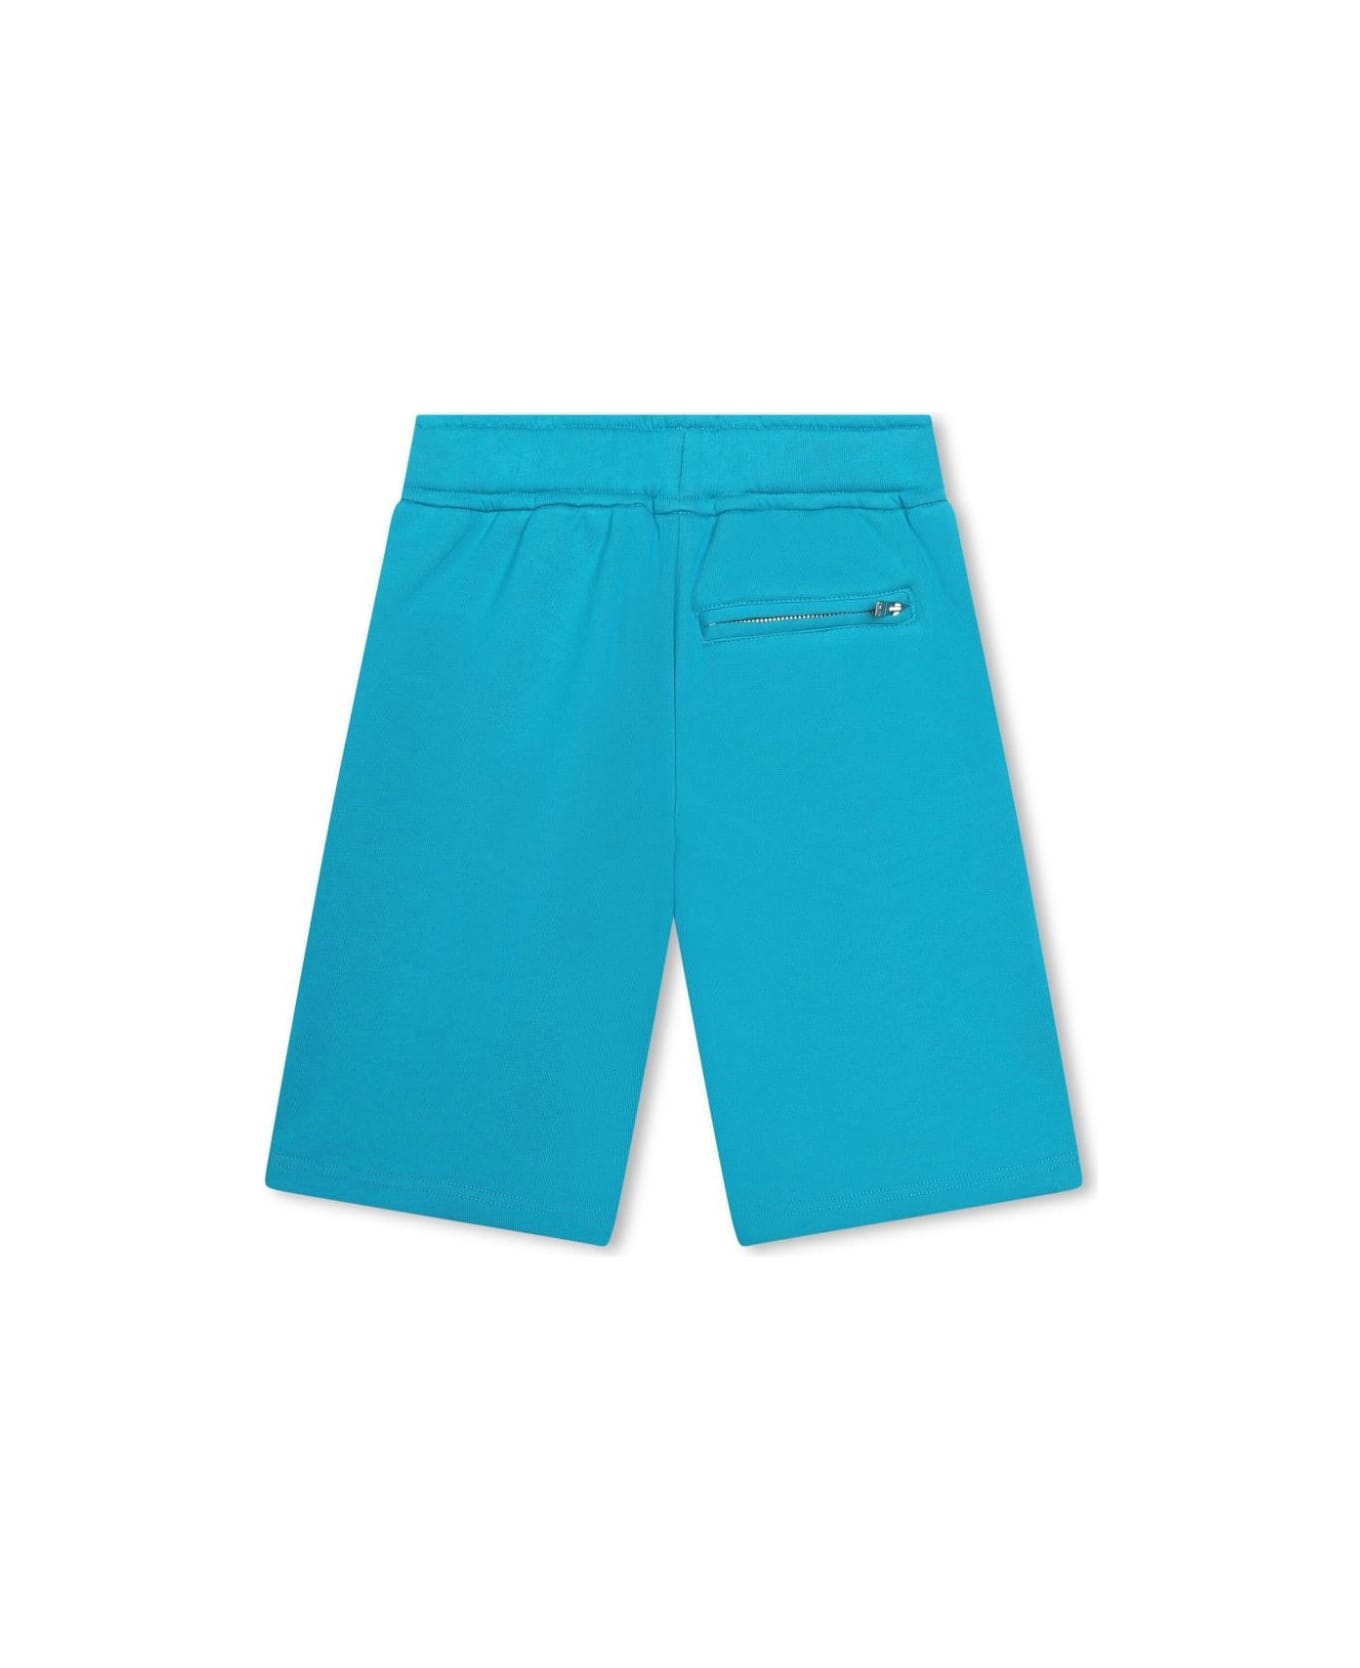 Lanvin Turquoise Shorts With Logo And 'curb' Motif - Azzurro